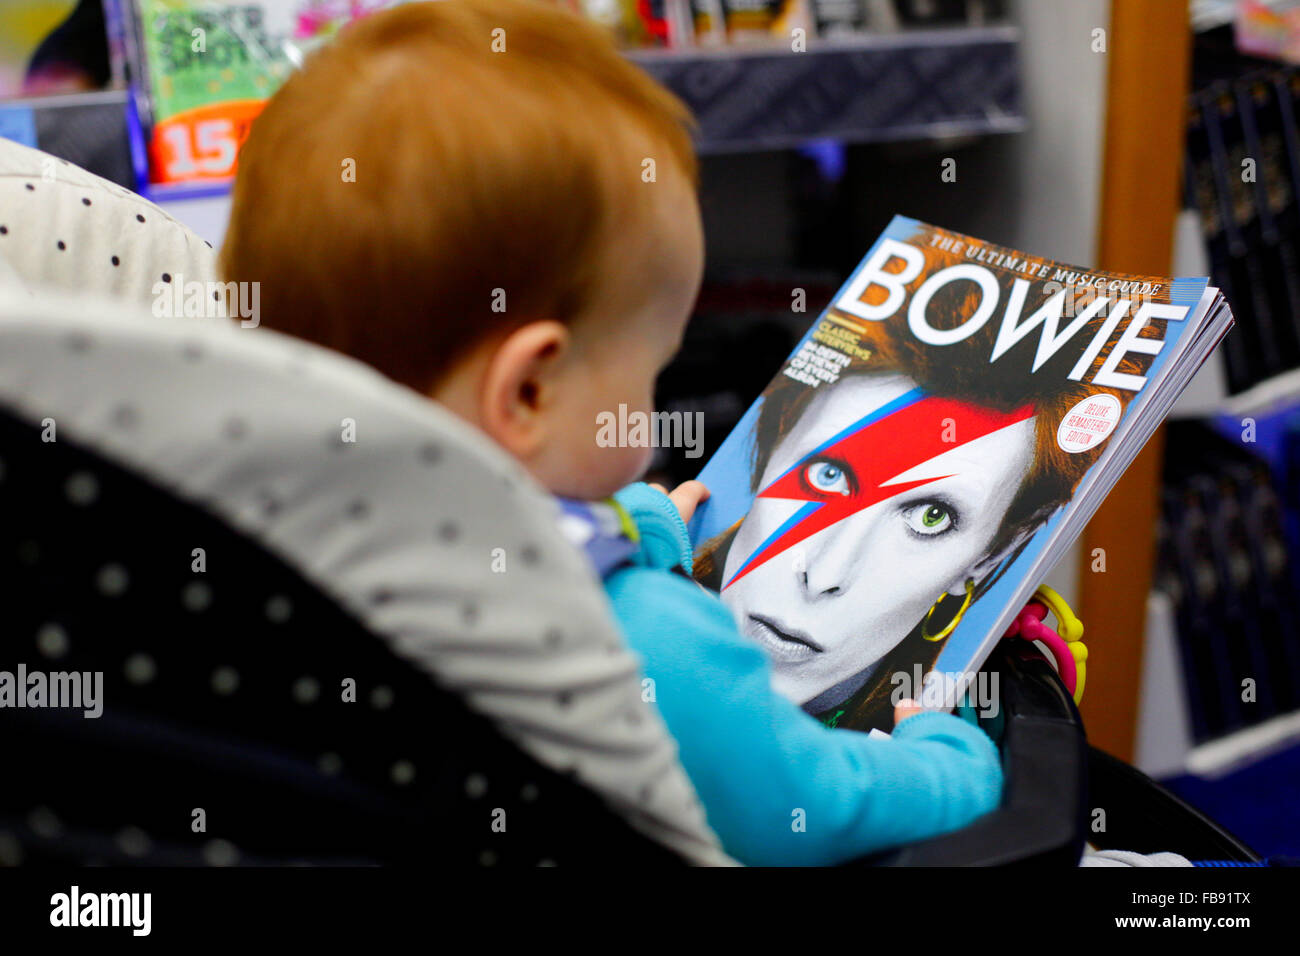 A young child in a pushchair, inside a shop, holding and looking at a magazine. The magazine is a bookazine tribute to David Bowie. The front cover of the publication has a full face portrait of Bowie with is distinctive lightening flash, made famous by his Aladdin Sane, alter ego character in the 1970’s. Stock Photo